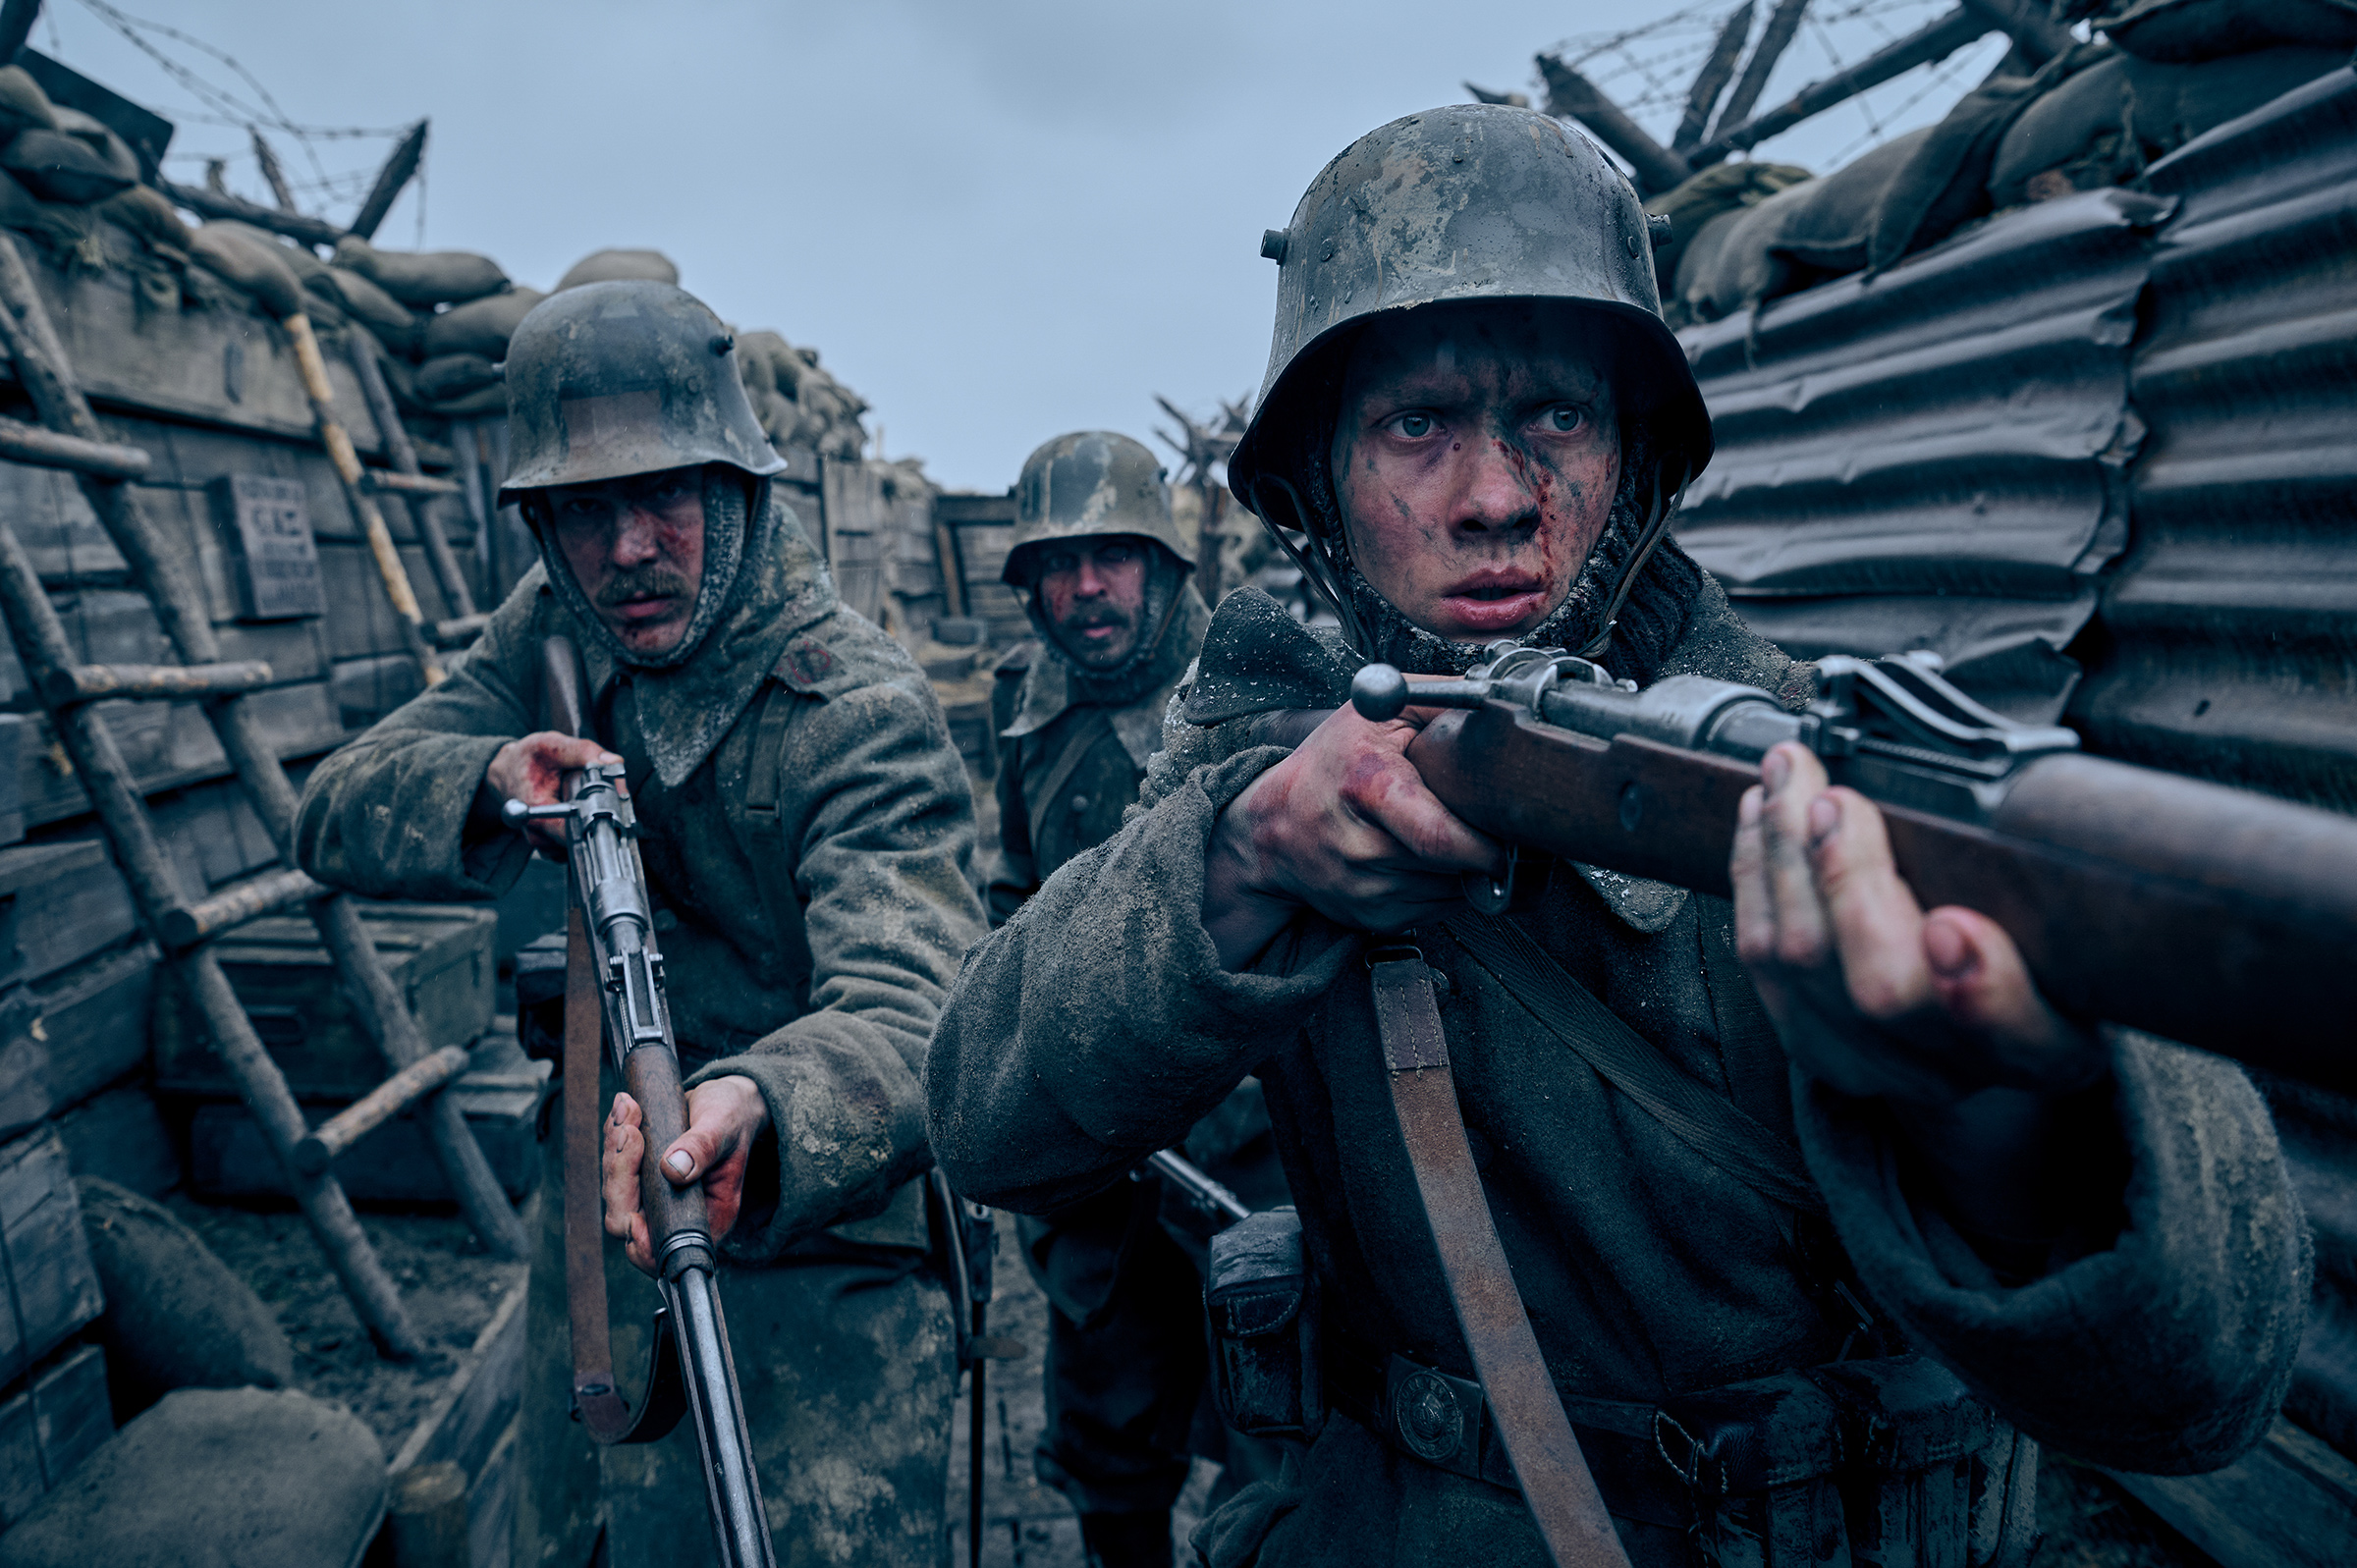 All Quiet on the Western Front is a movie based on World War I 